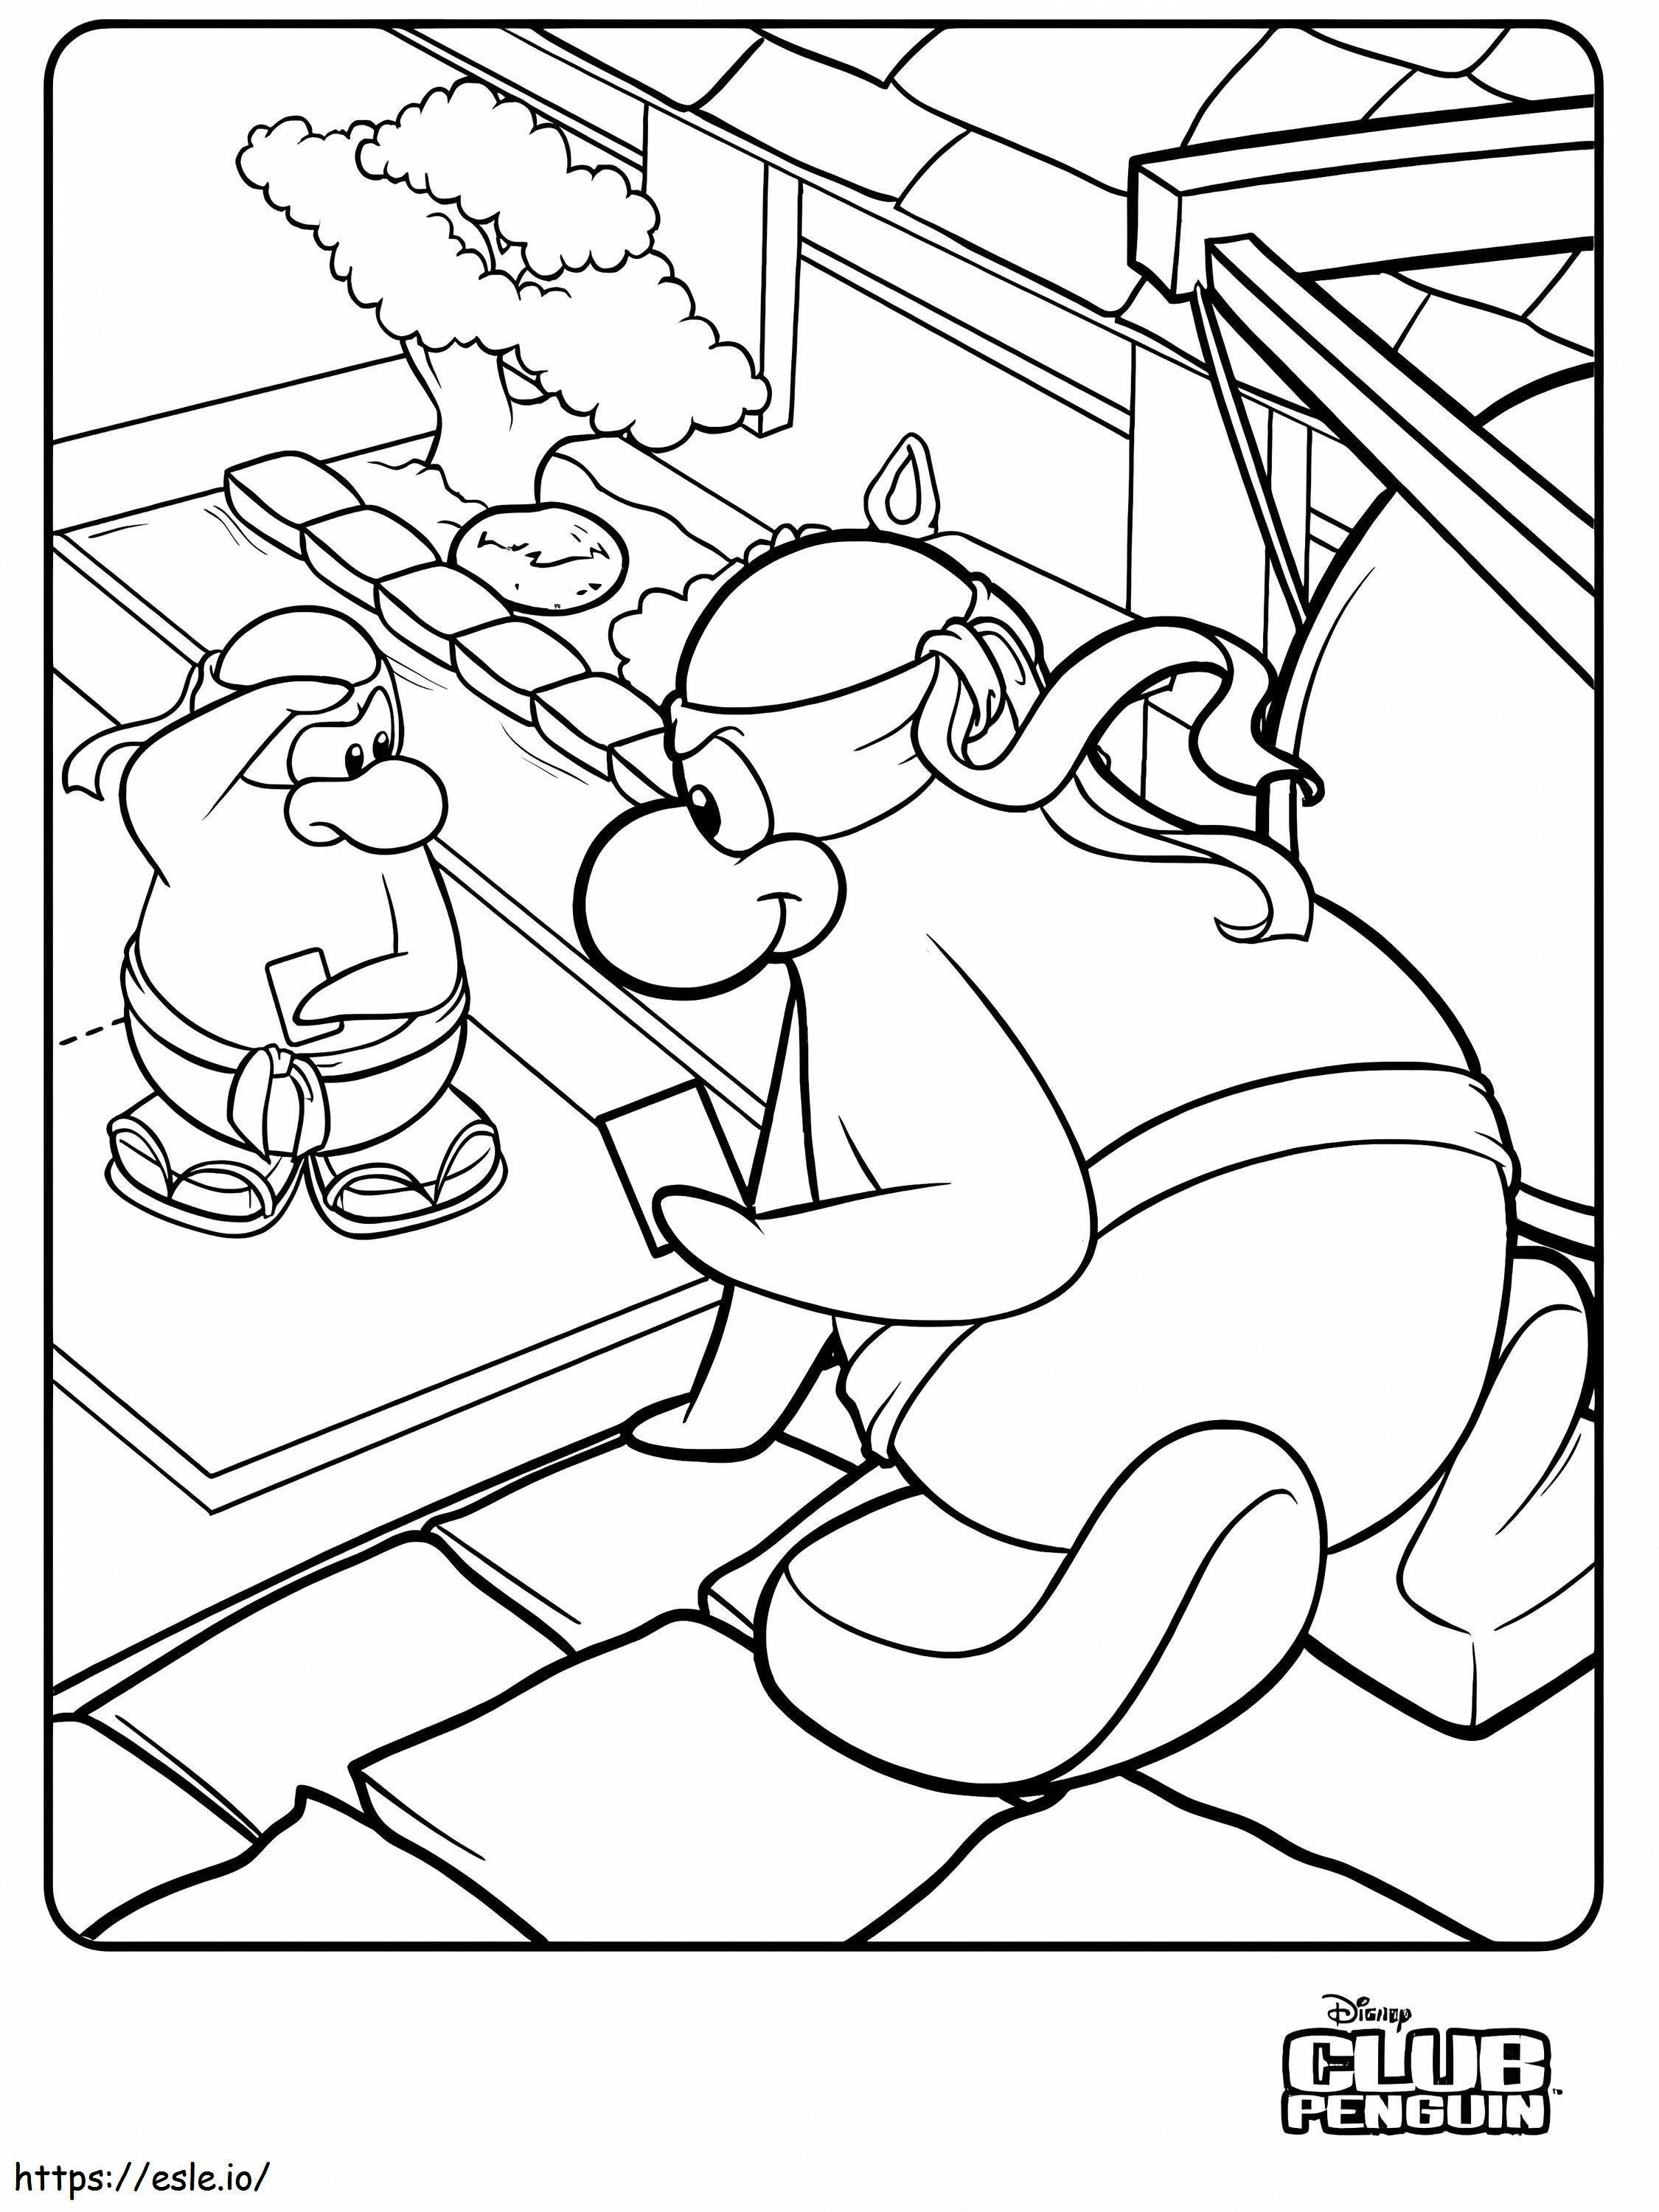 Club Penguin 4 coloring page